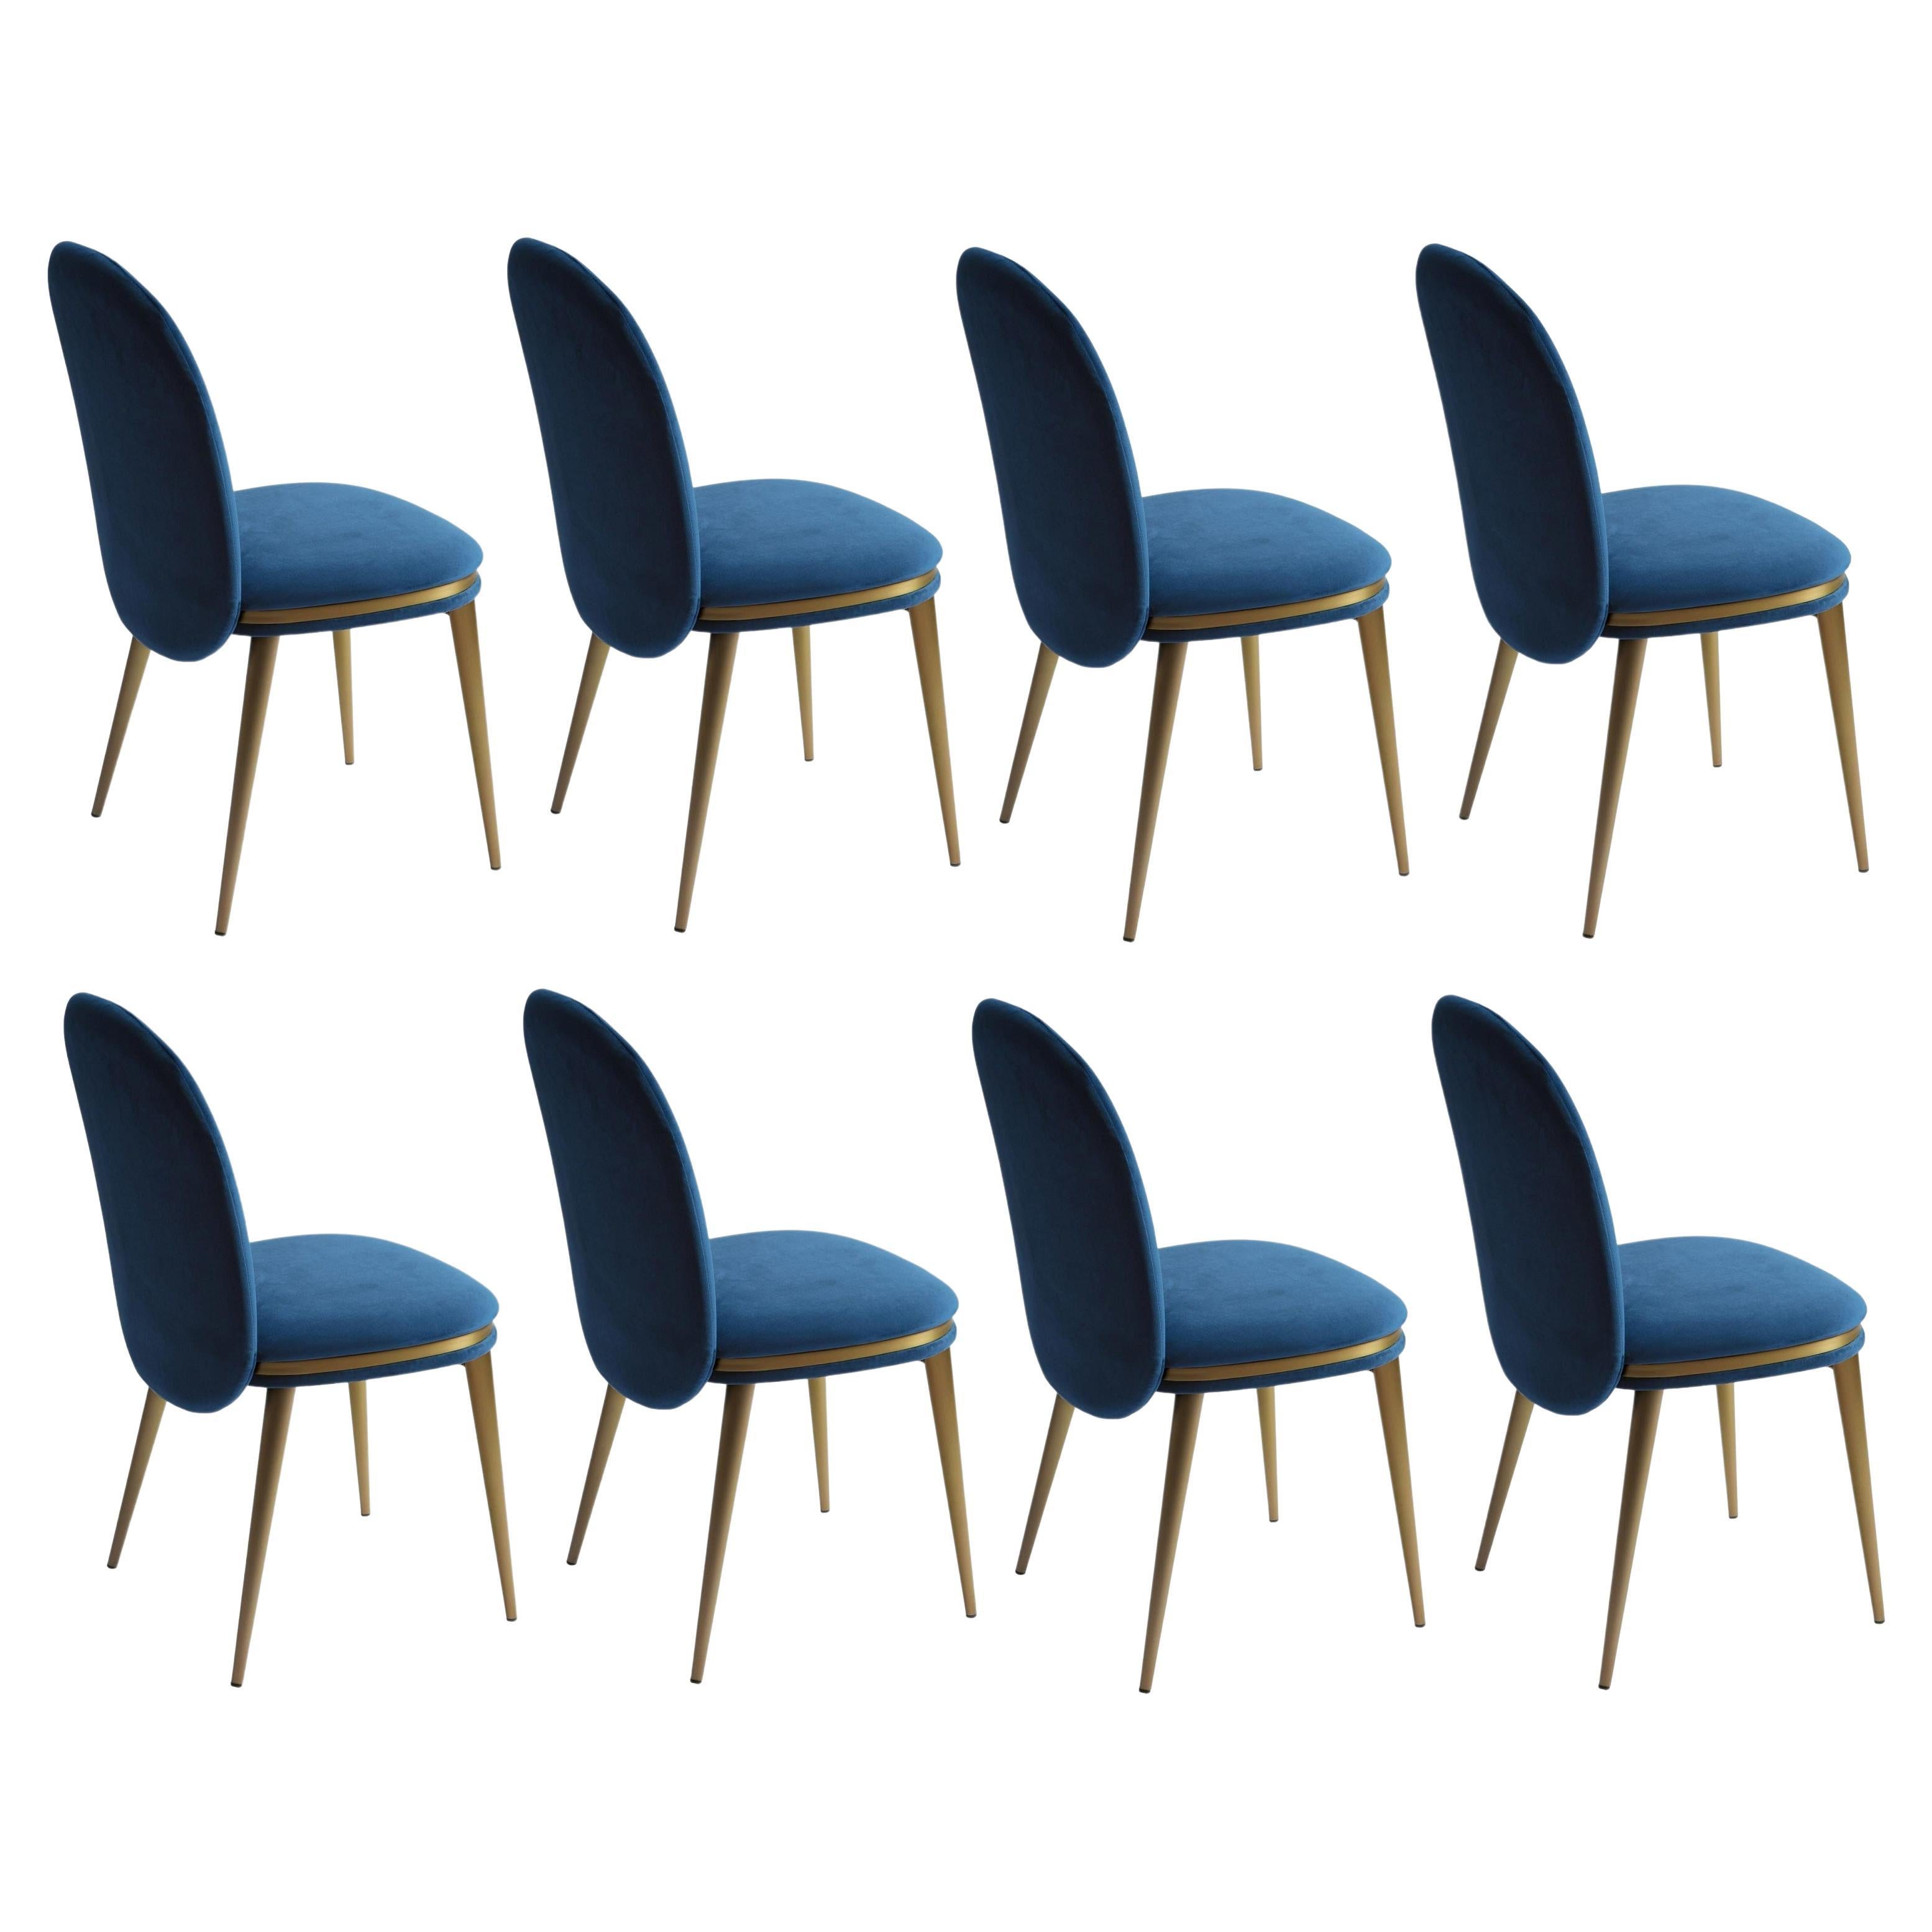 Italian Made to Order Dining Chairs Offered in Velvet, Set of 8 For Sale